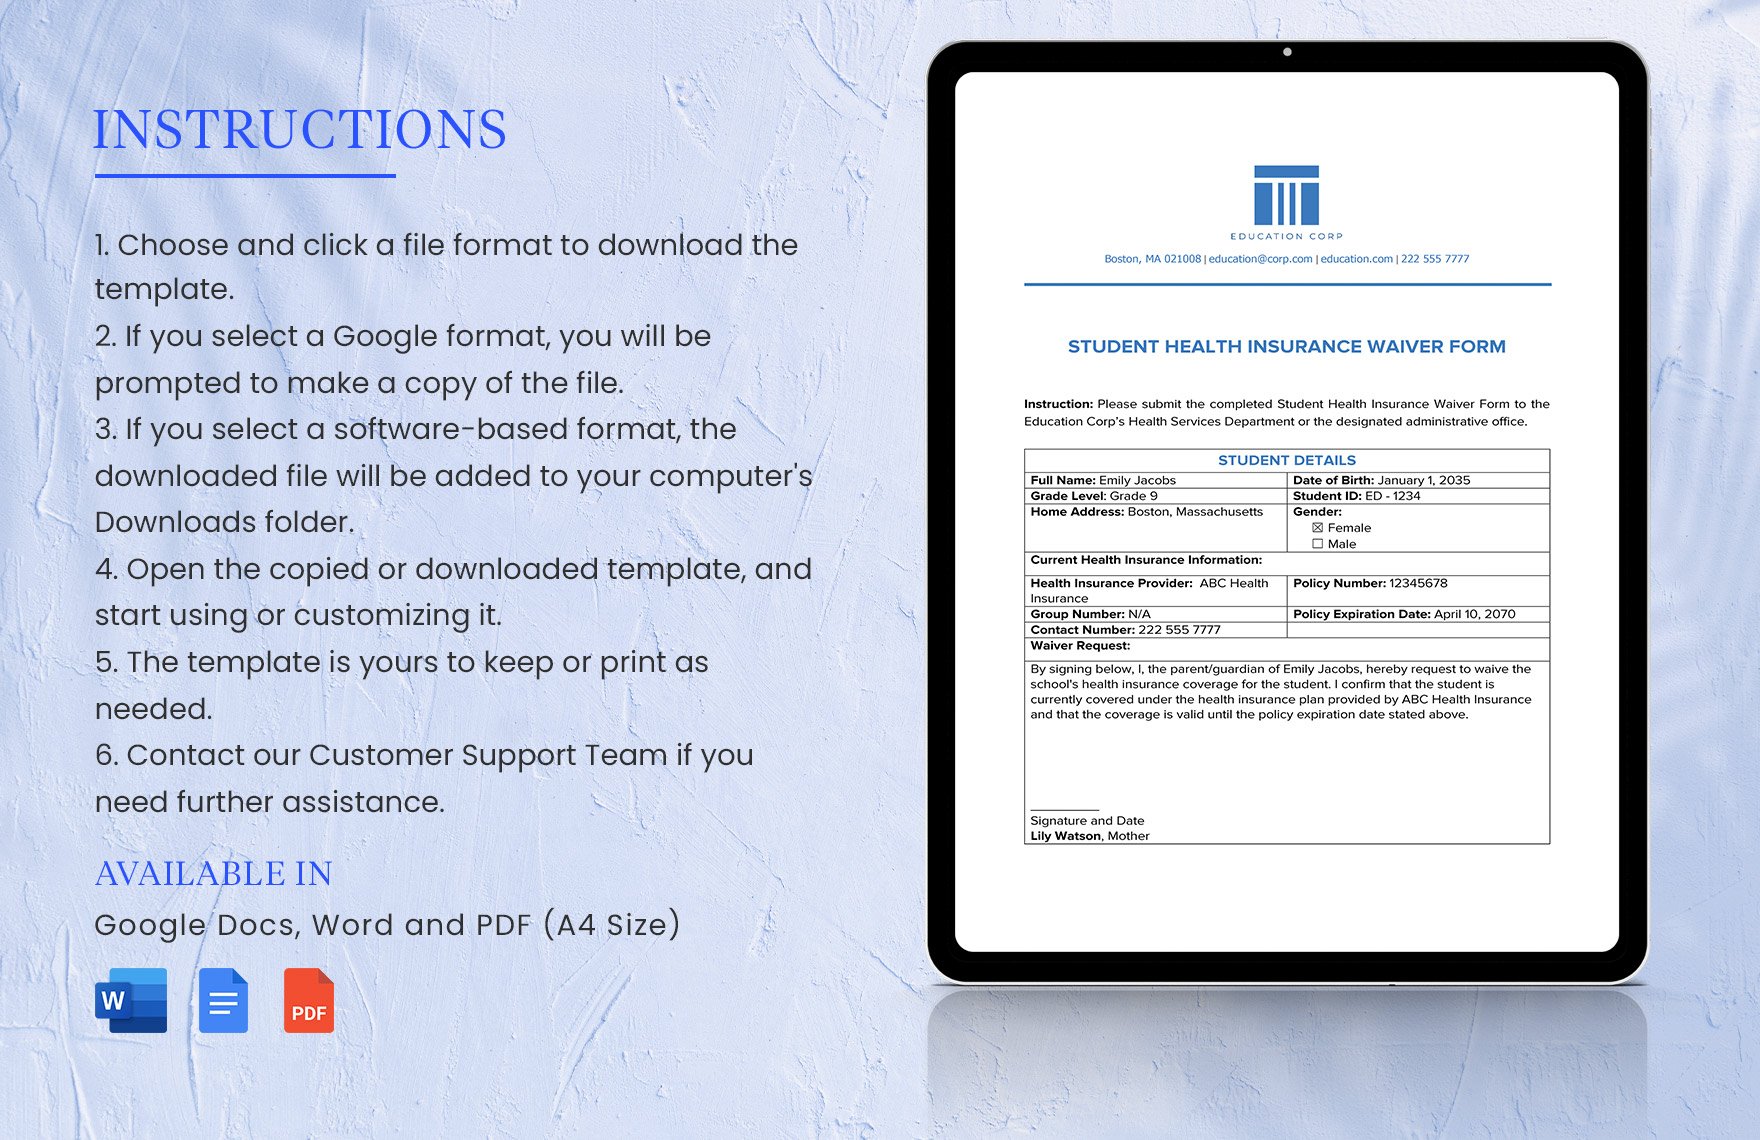 Student Health Insurance Waiver Form Template